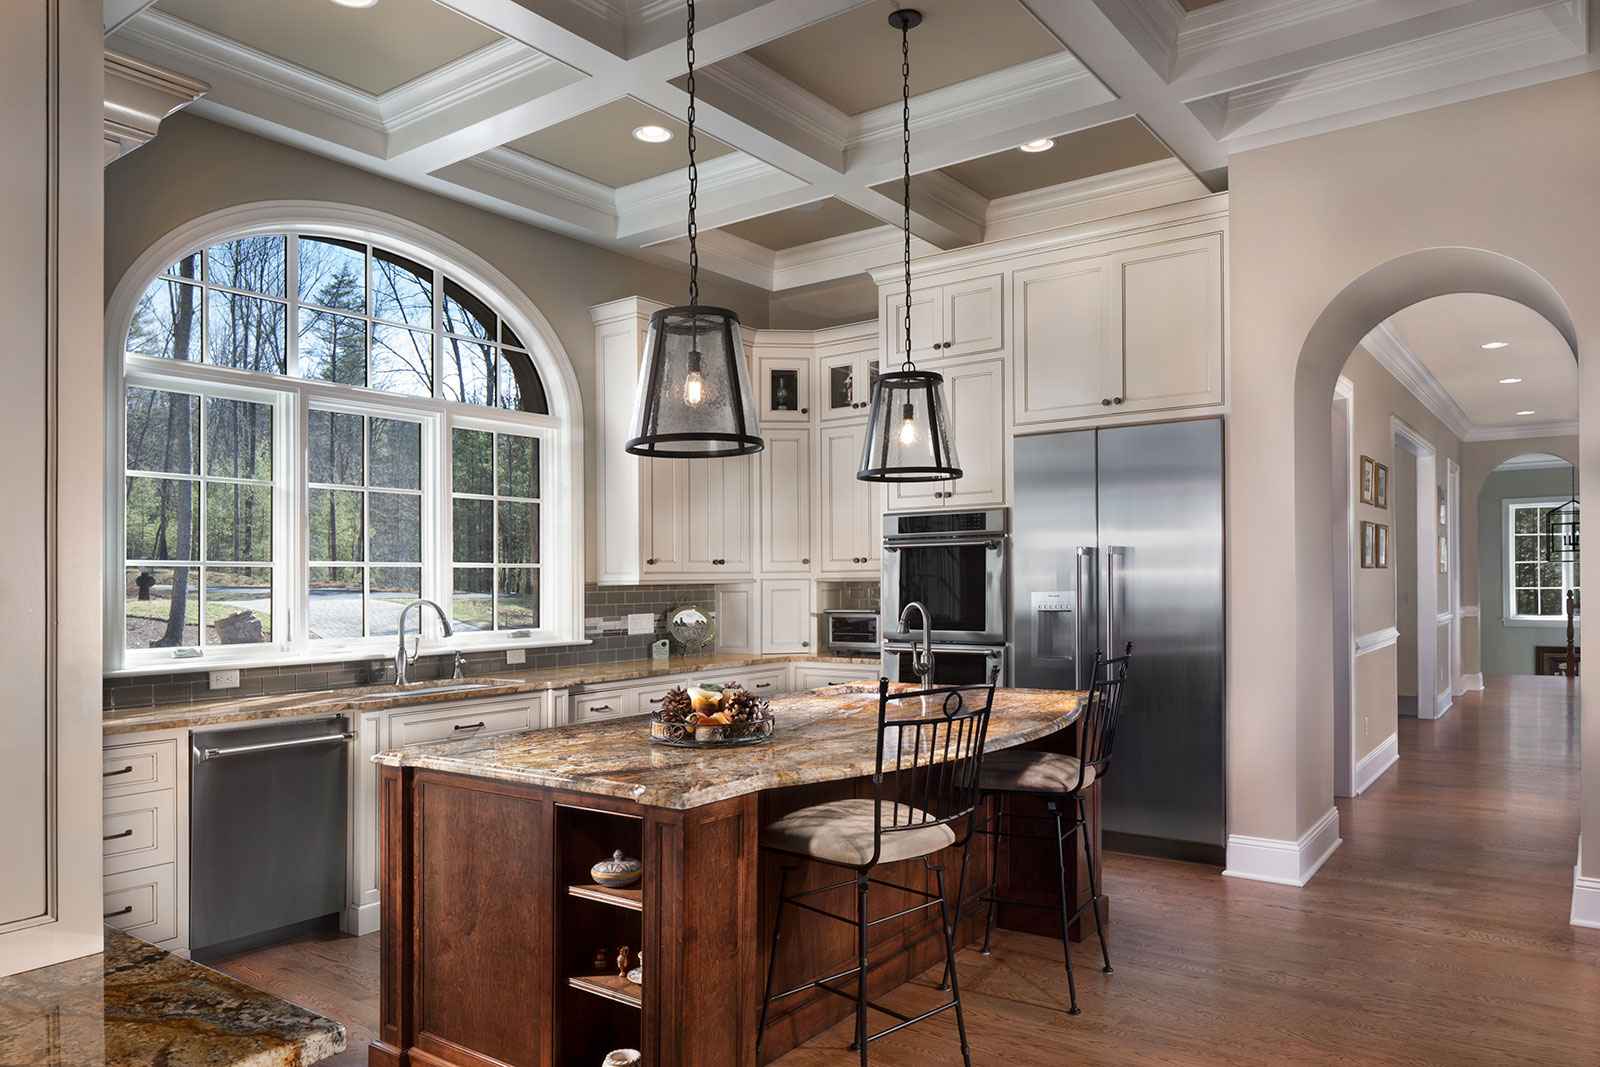 Arched doorways and windows in the kitchen of a custom-built modern Tudor home.